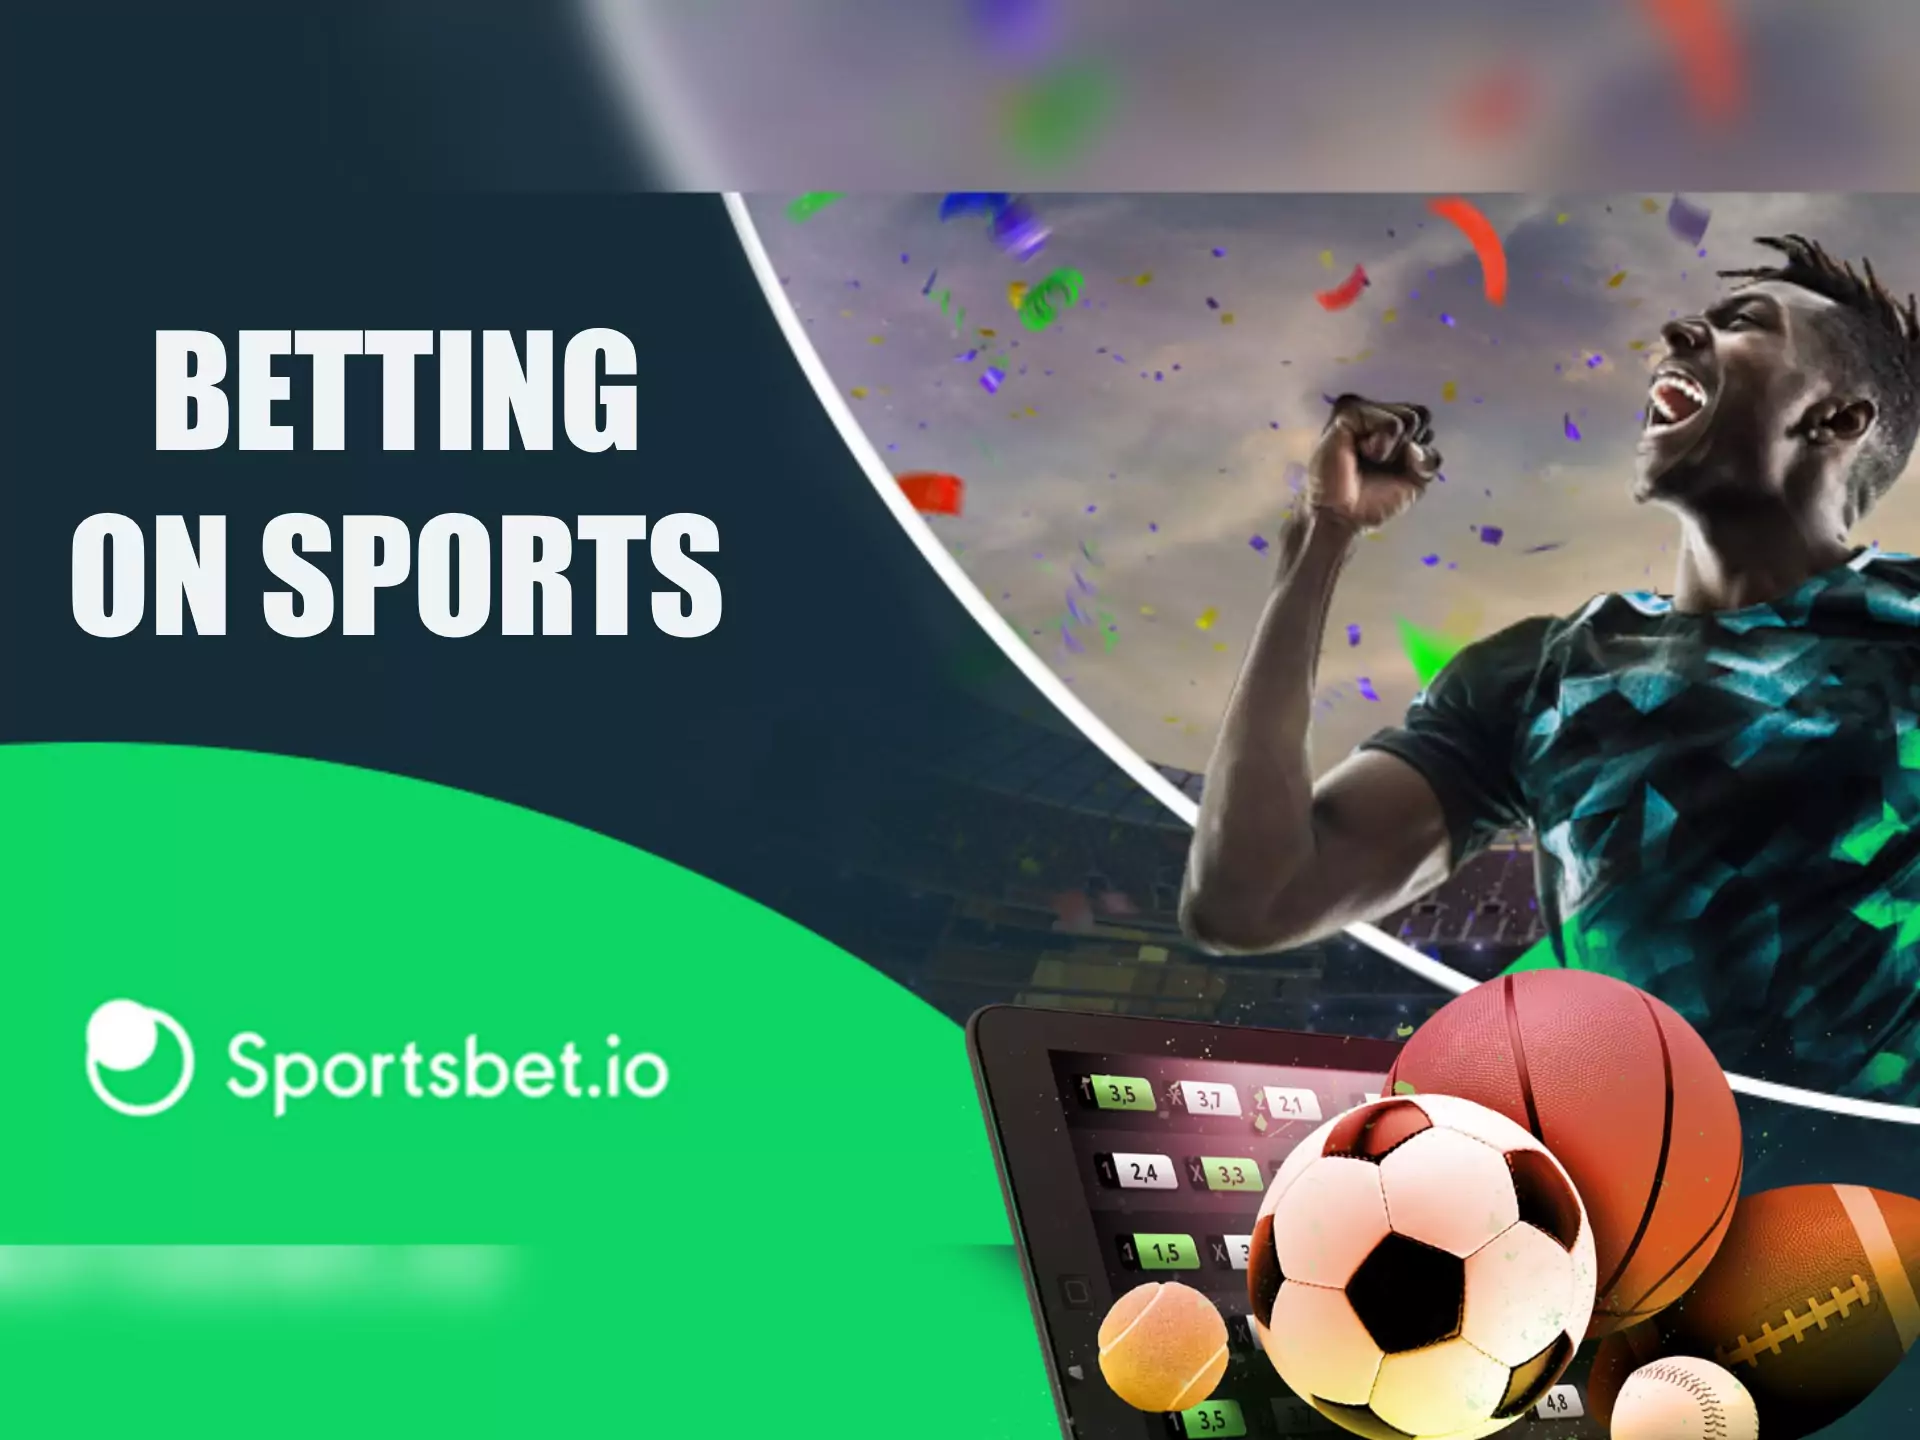 Choose your favorite sport and place bets via the Sportsbet app.